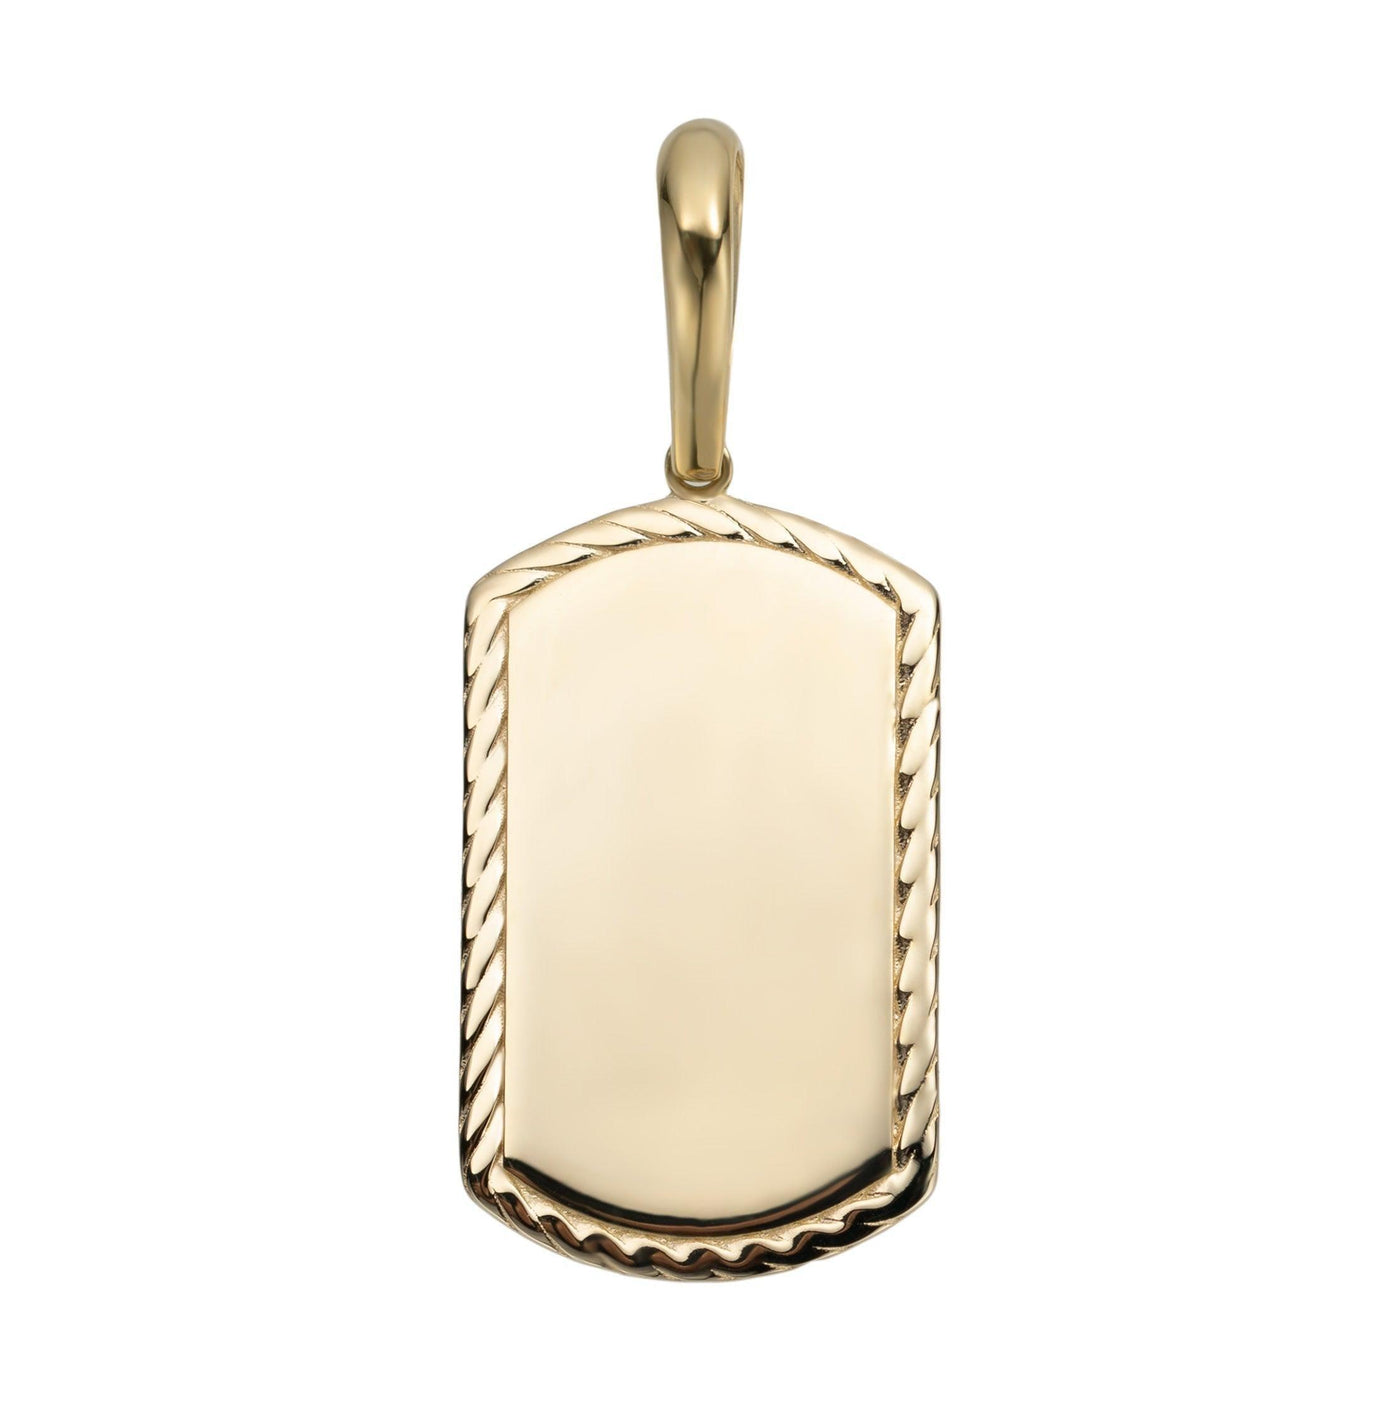 2" Textured Dog Tag Pendant Solid 10K Yellow Gold - bayamjewelry